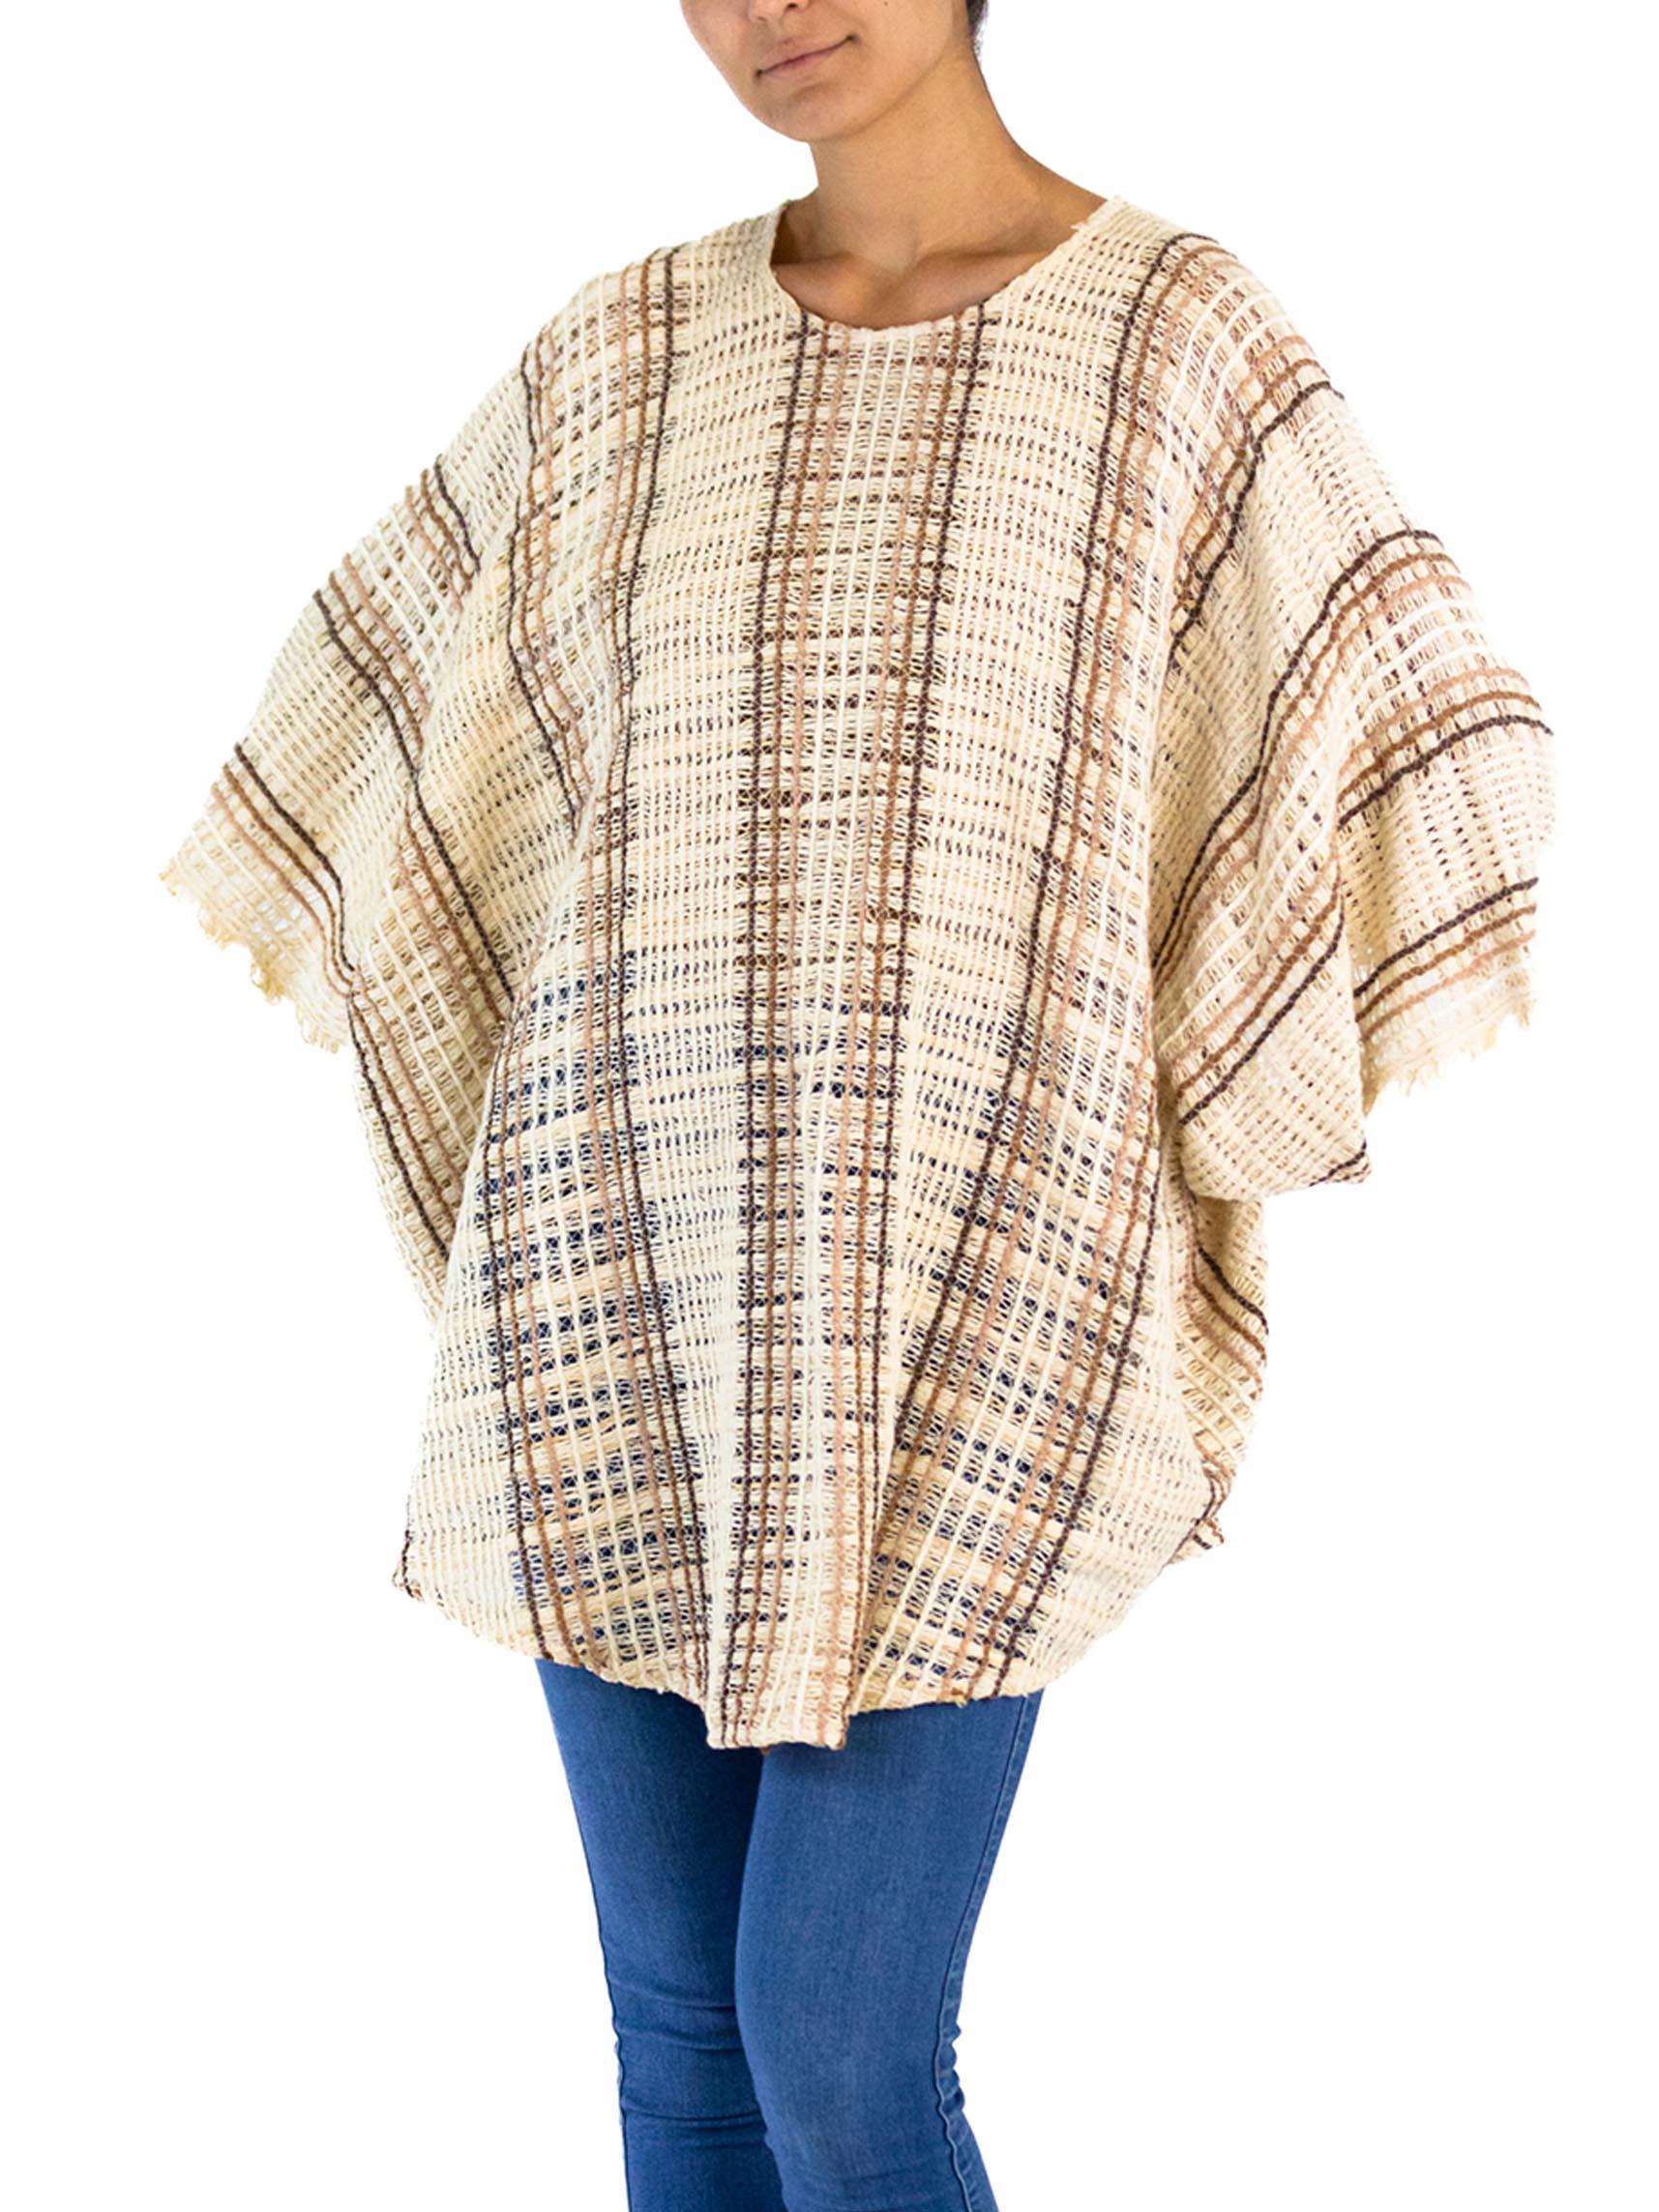 1970S Brown & Cream Cotton Blend Open Weave Tunic Top For Sale 4